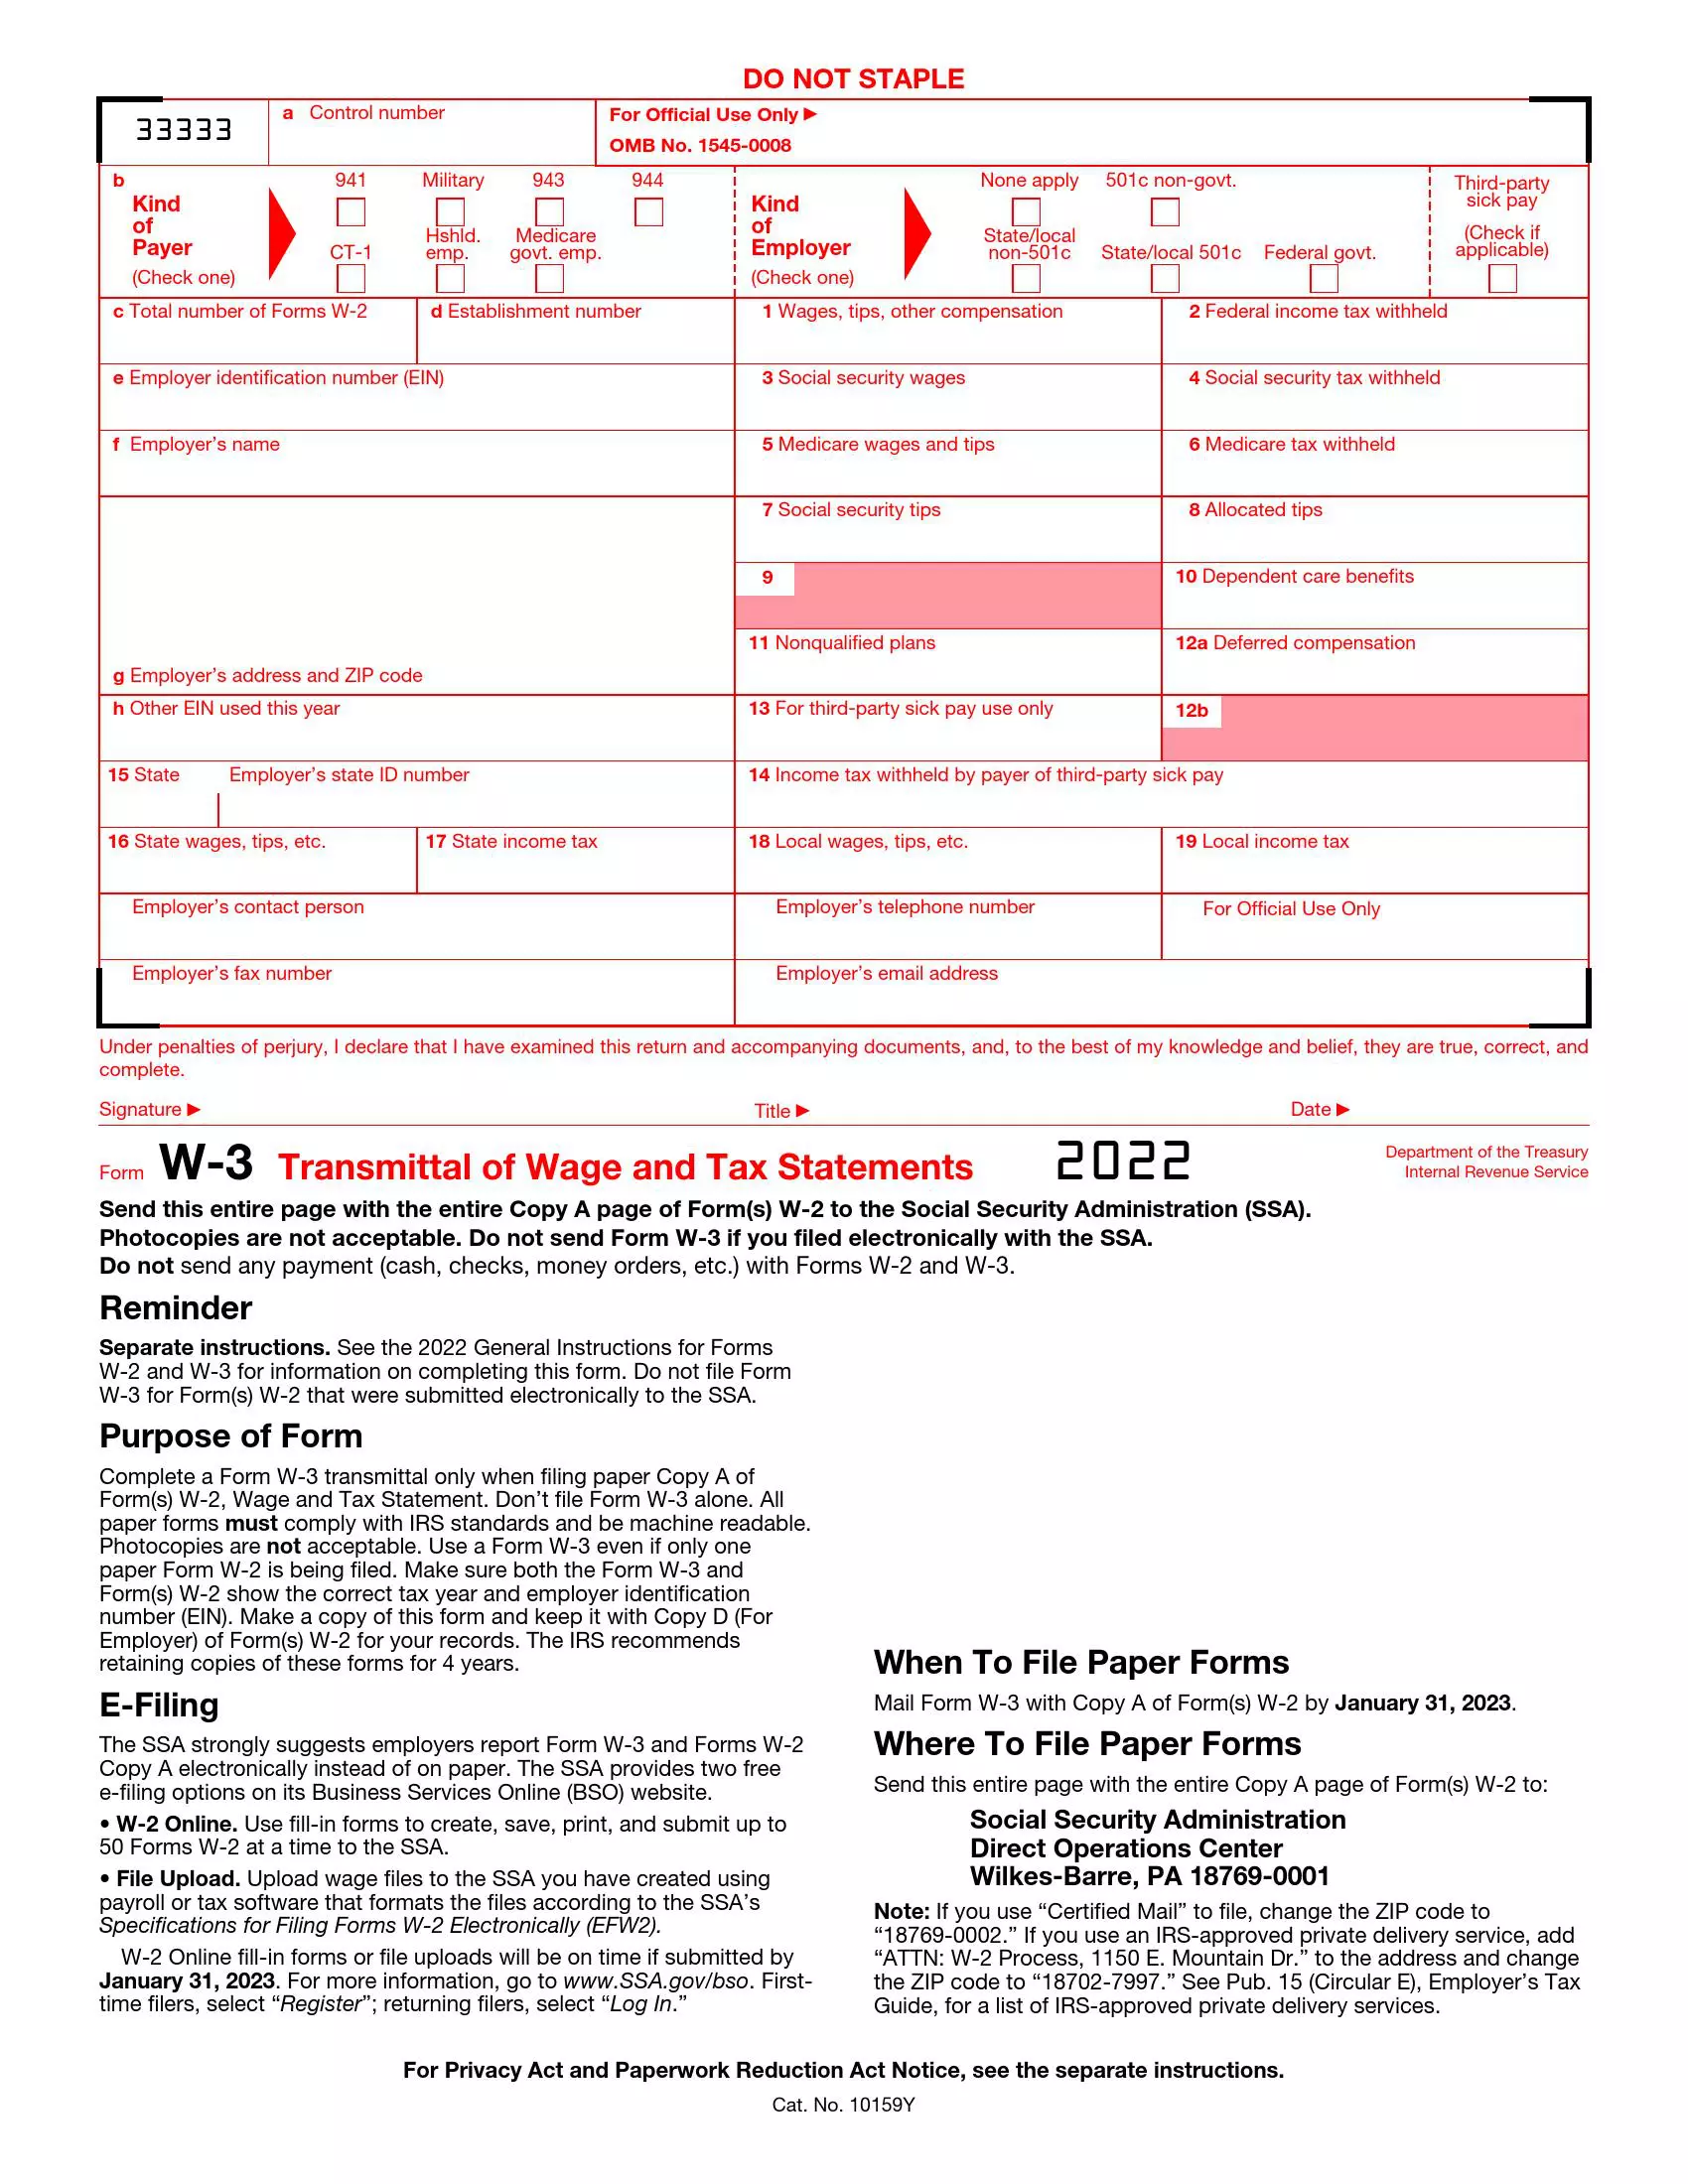 irs form w-3 2022 preview